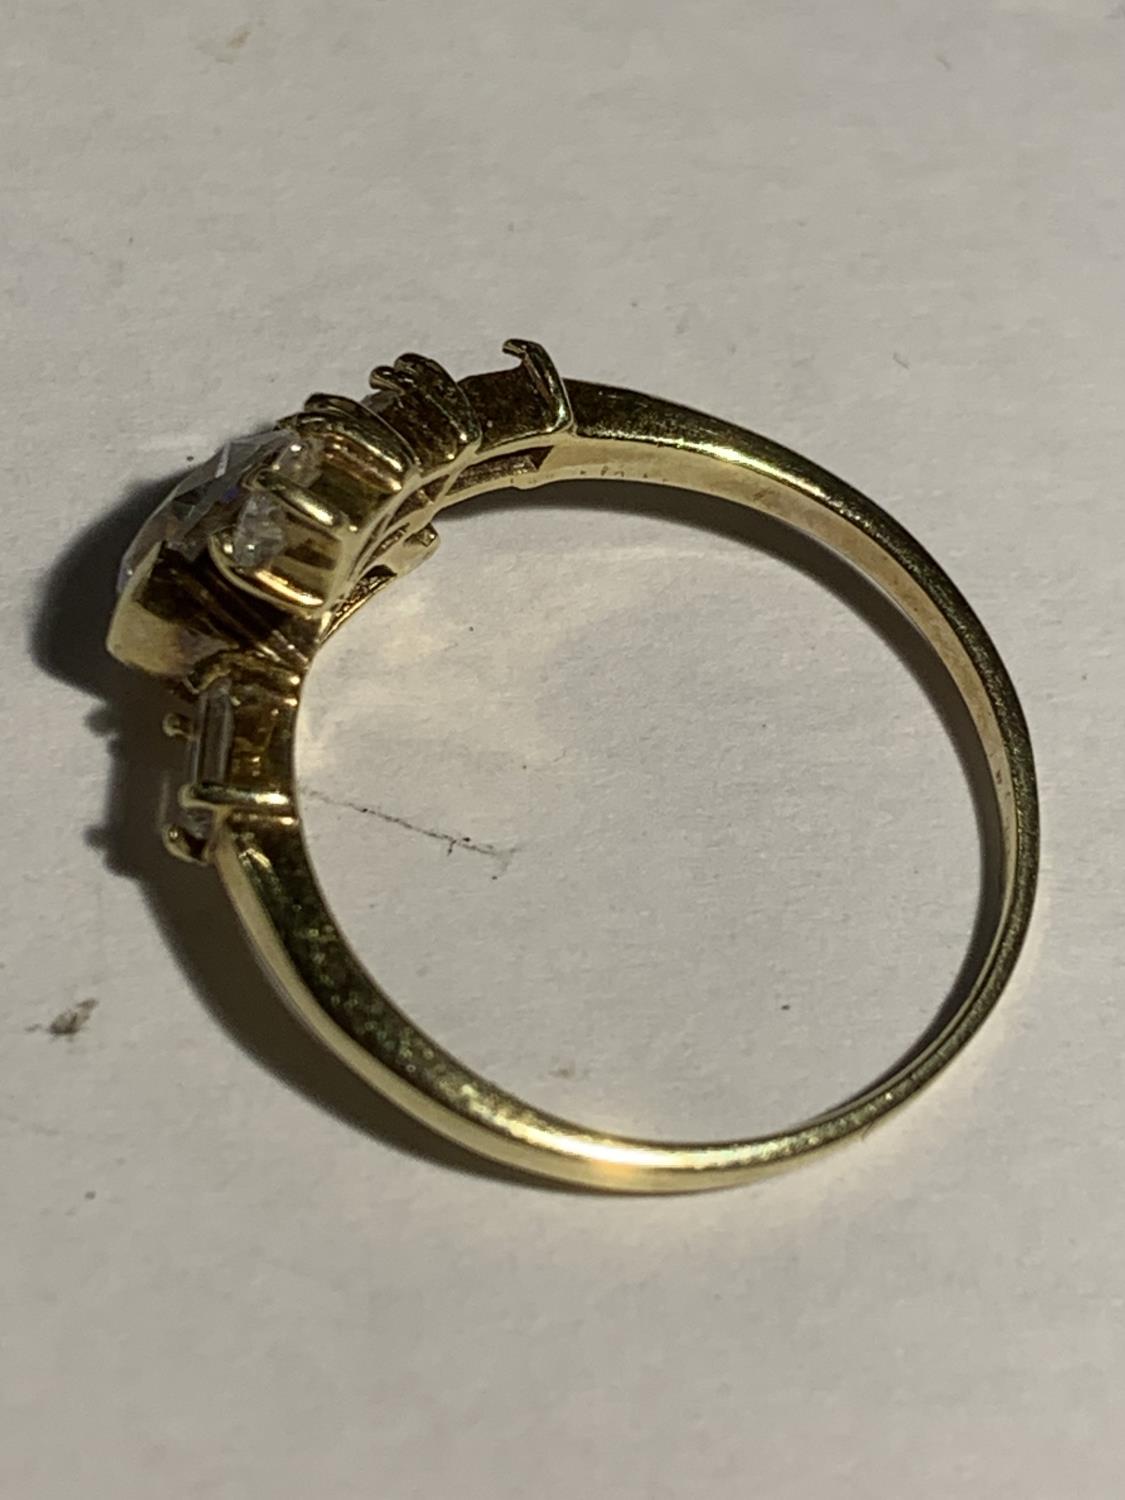 A 9 CARAT GOLD RING WITH CLEAR STONES SIZE P GROSS WEIGHT 3.1 GRAMS (A/F STONE MISSING) - Image 3 of 3